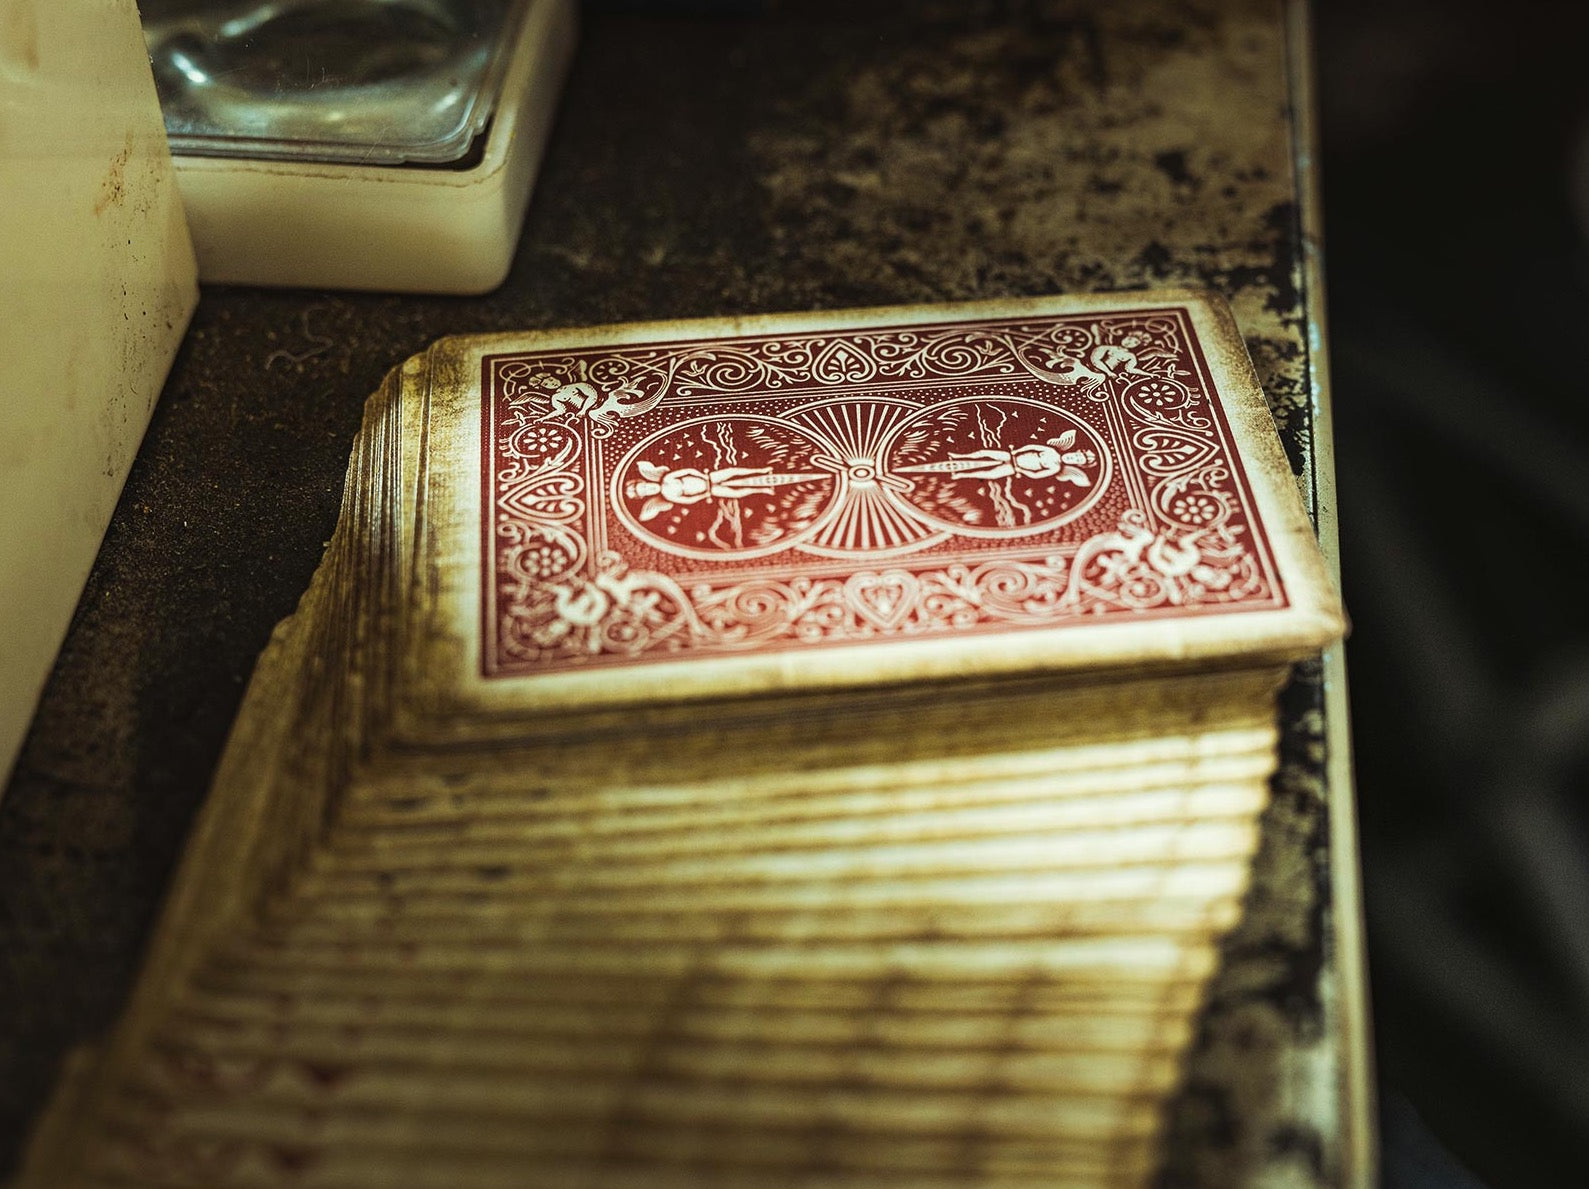 Bicycle 1900 - Red by Ellusionist | Ellusionist